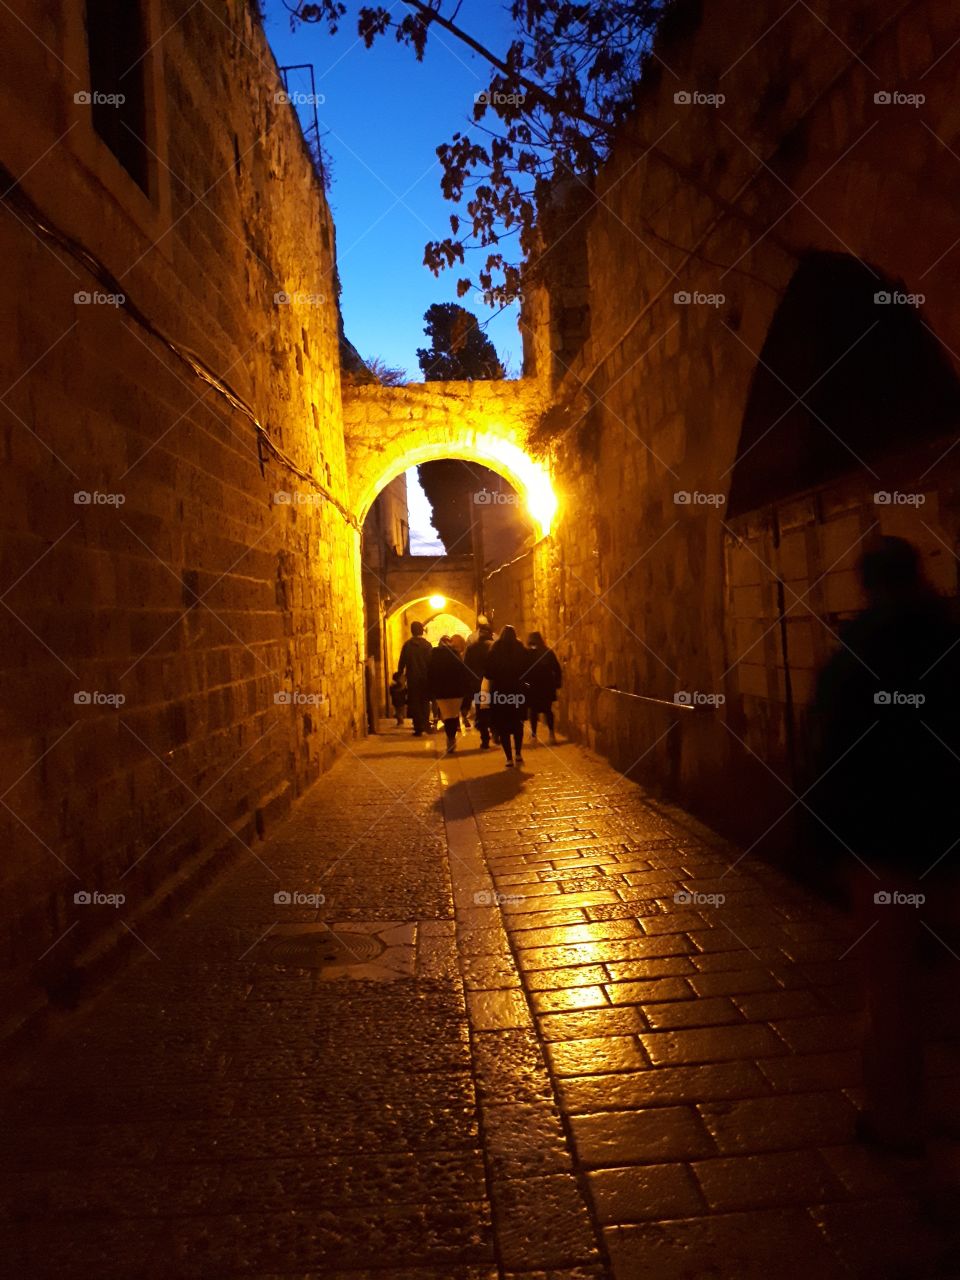 Magical moment.
A stroll in Jerusalem's Old City